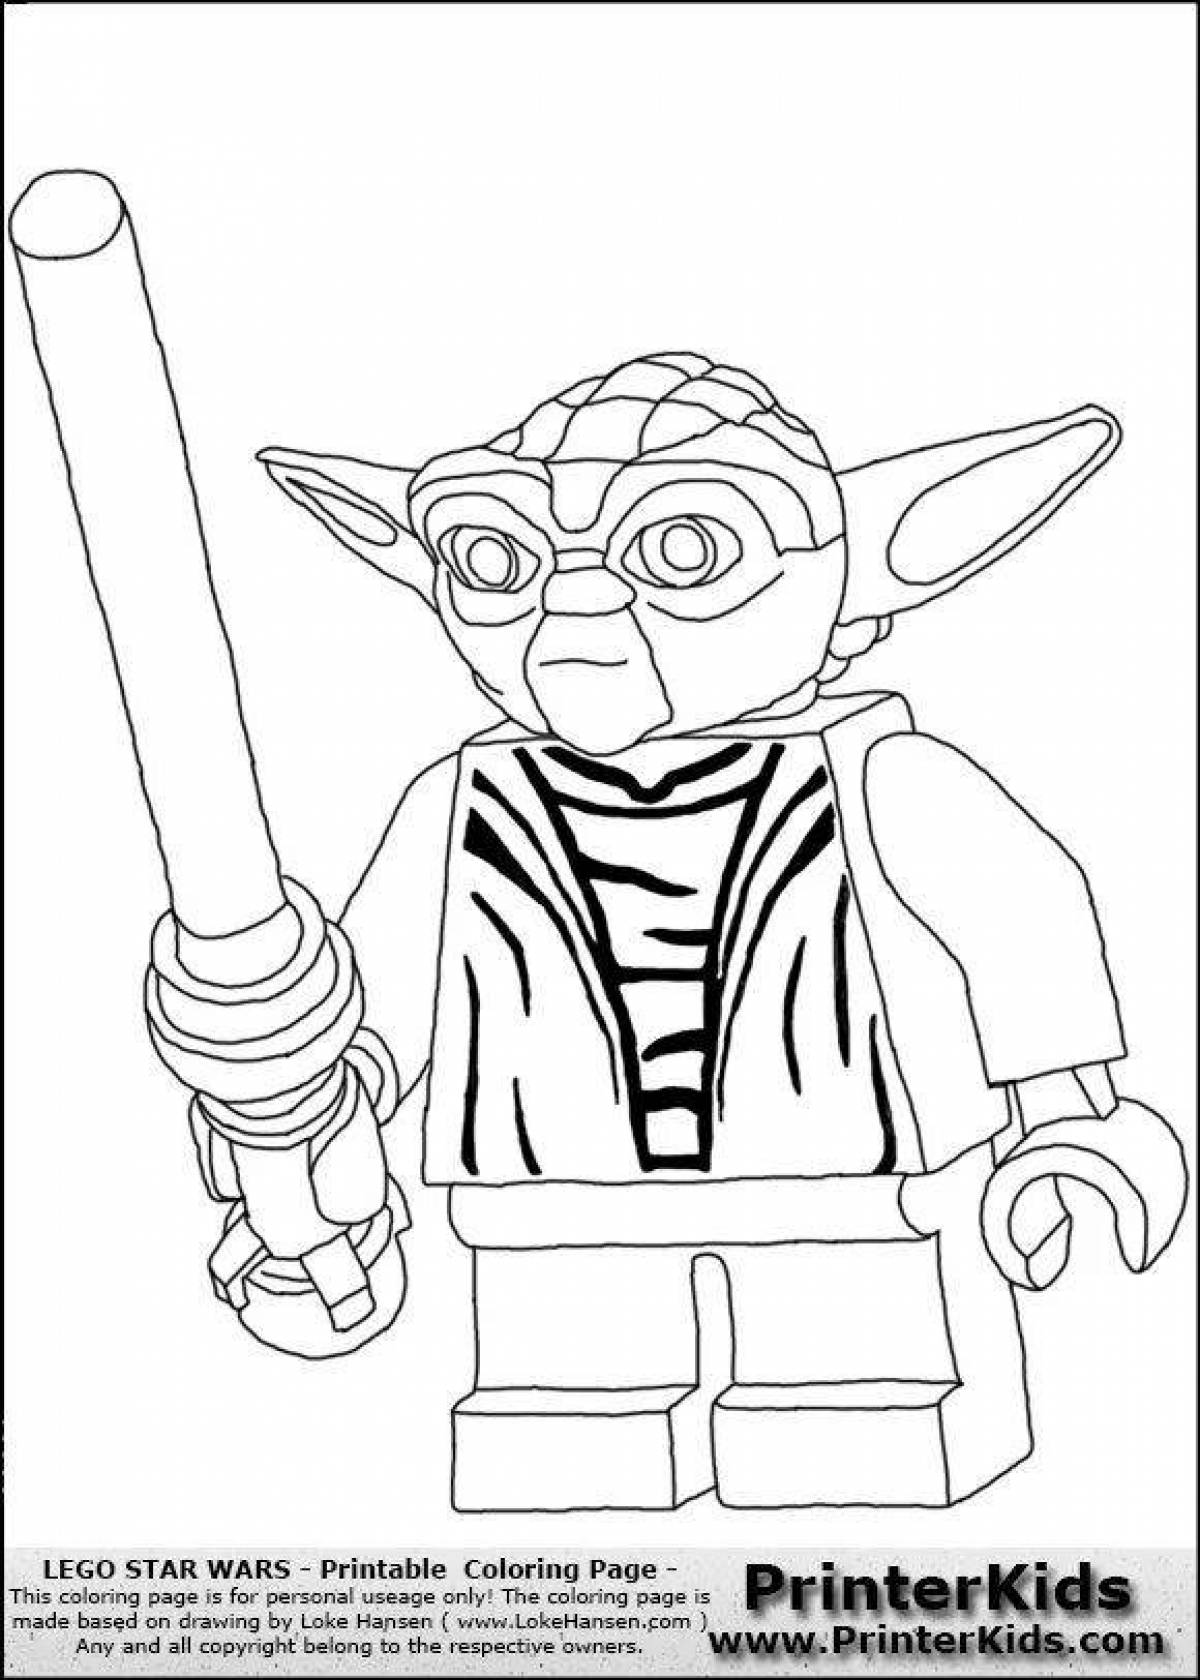 Beautiful lego star wars coloring page